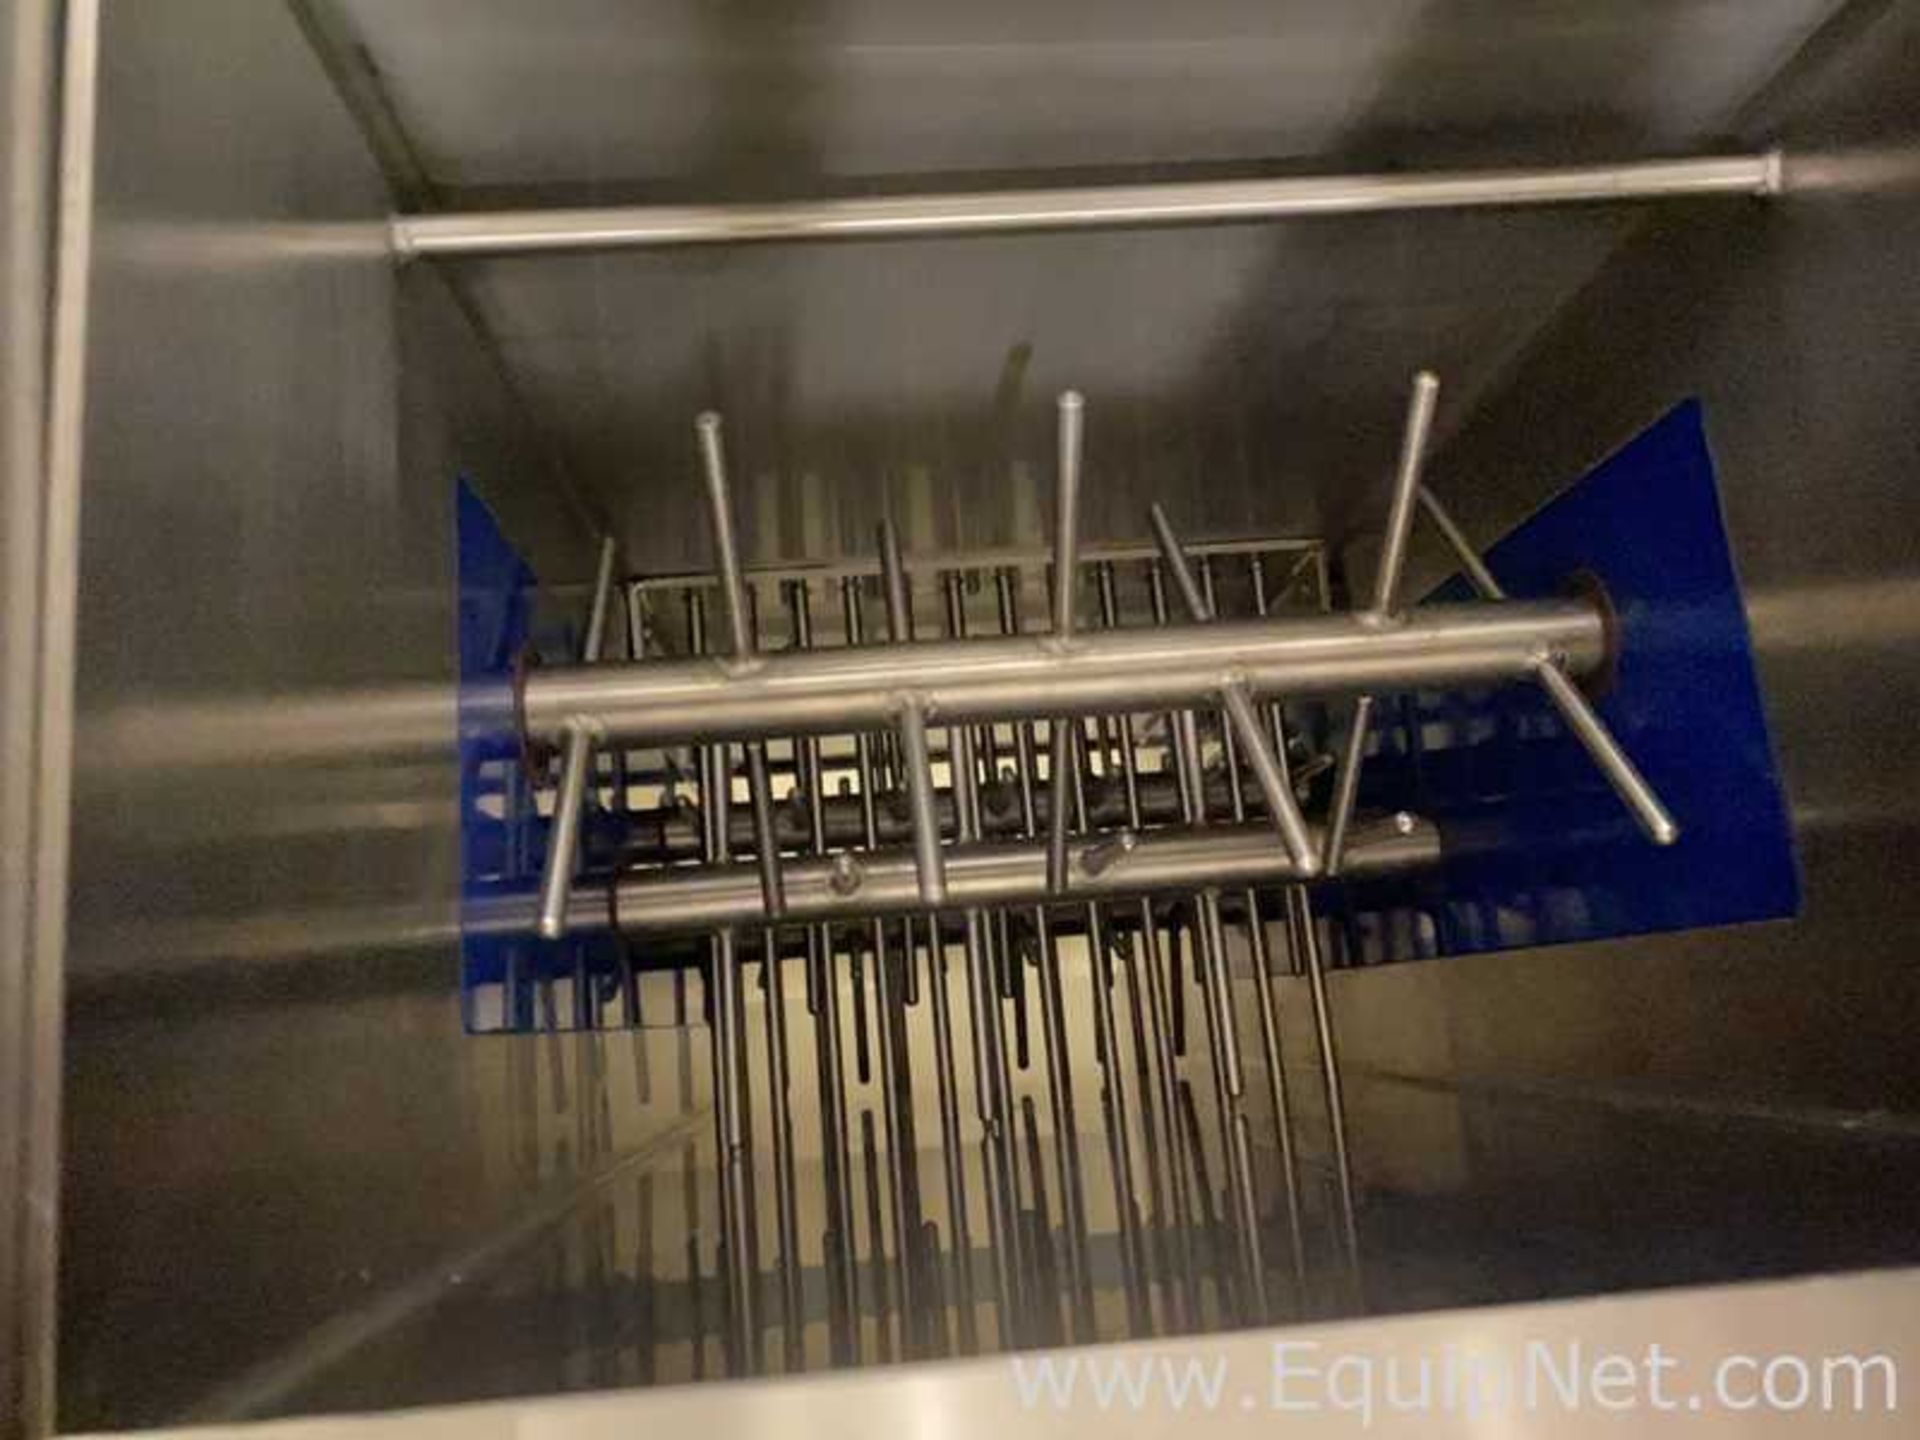 CM Machine Services Meat Shredding Machine With Flighted Incline Conveyor for Shredder - Image 6 of 15